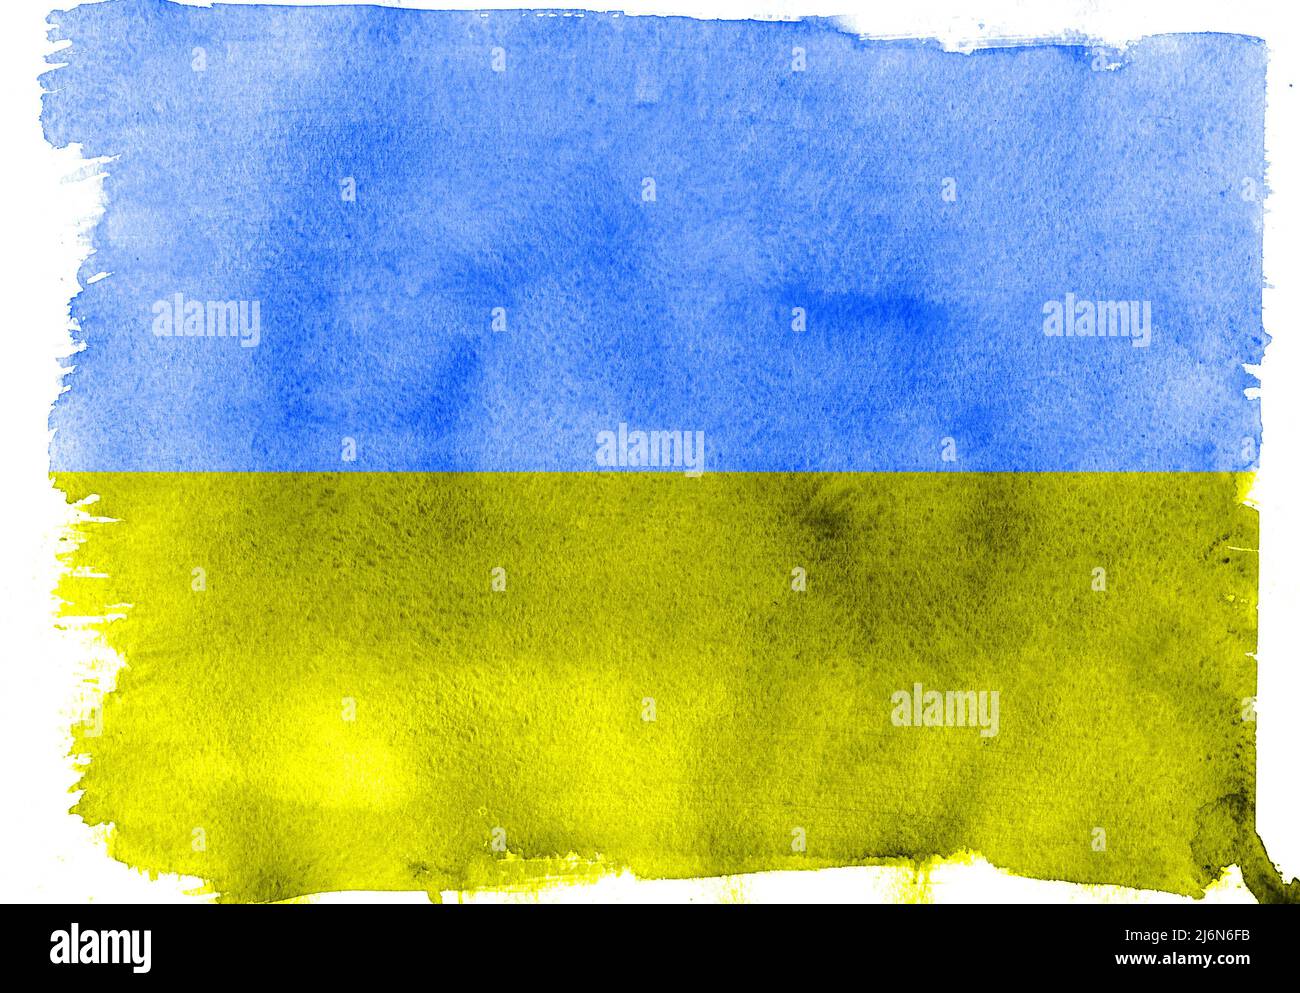 Blue and yellow Ukrainian flag watercolor pattern Stock Photo